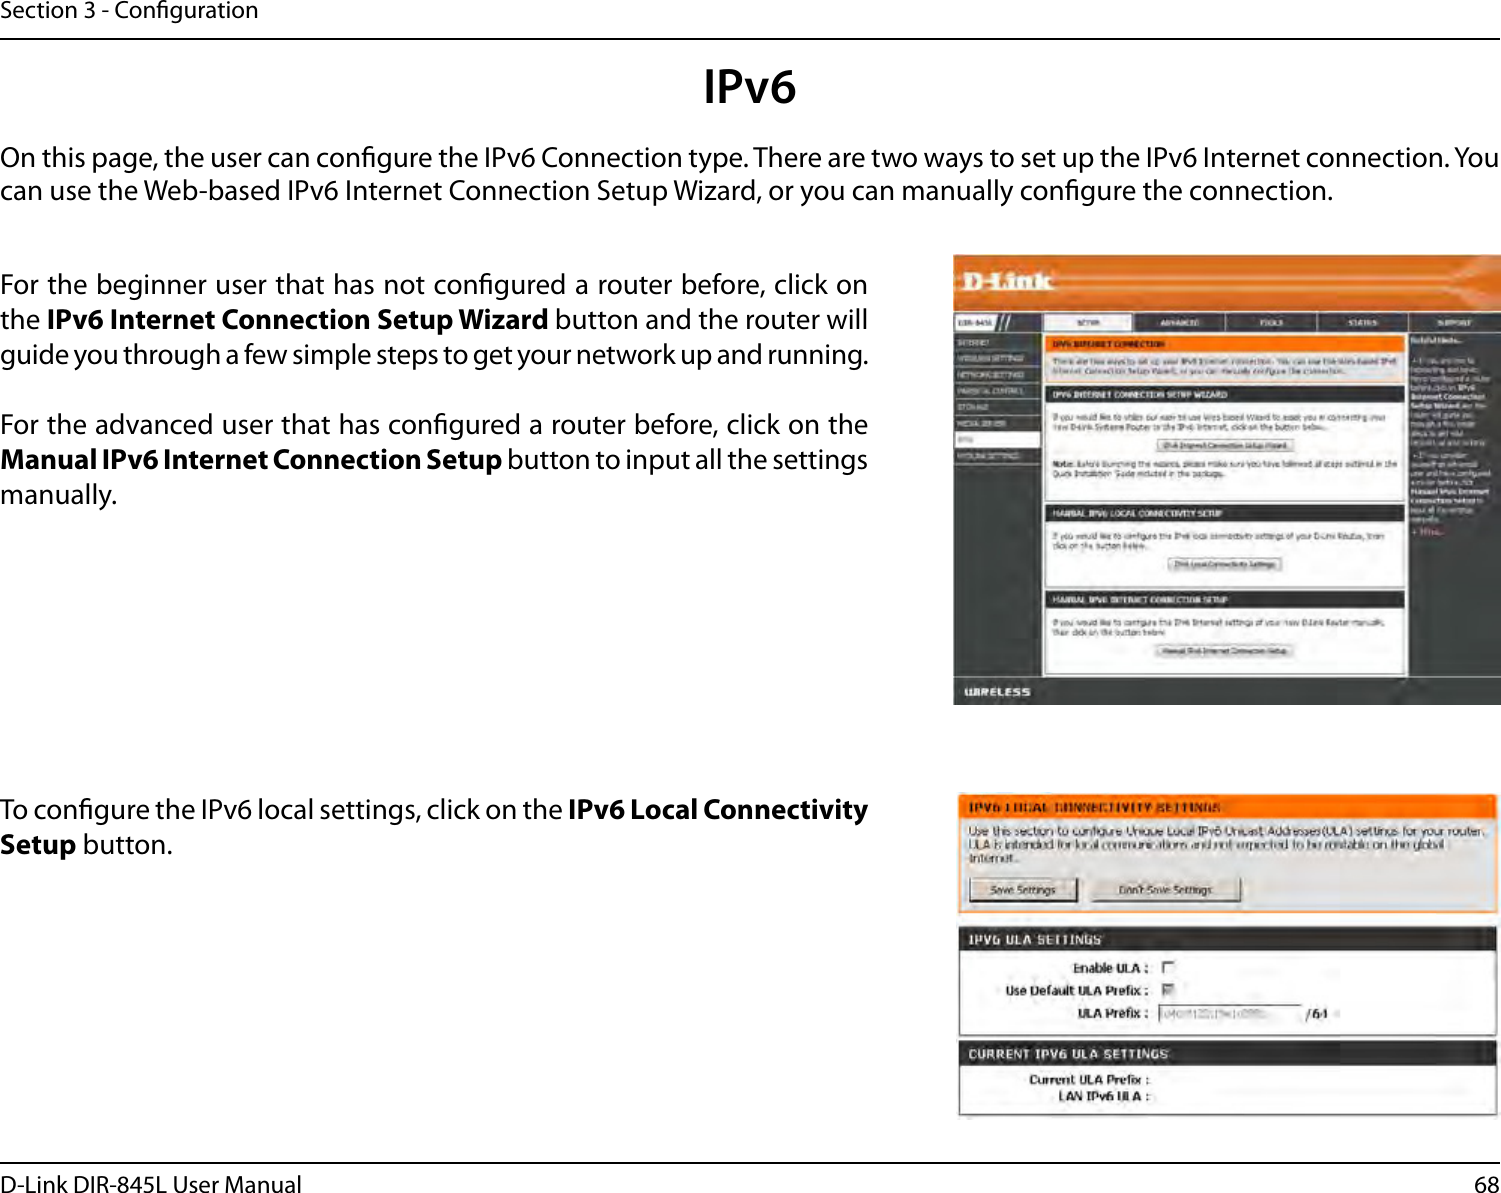 68D-Link DIR-845L User ManualSection 3 - CongurationIPv6On this page, the user can congure the IPv6 Connection type. There are two ways to set up the IPv6 Internet connection. You can use the Web-based IPv6 Internet Connection Setup Wizard, or you can manually congure the connection.For the beginner user that has not congured a router before, click on the IPv6 Internet Connection Setup Wizard button and the router will guide you through a few simple steps to get your network up and running.For the advanced user that has congured a router before, click on the Manual IPv6 Internet Connection Setup button to input all the settings manually.To congure the IPv6 local settings, click on the IPv6 Local Connectivity Setup button.